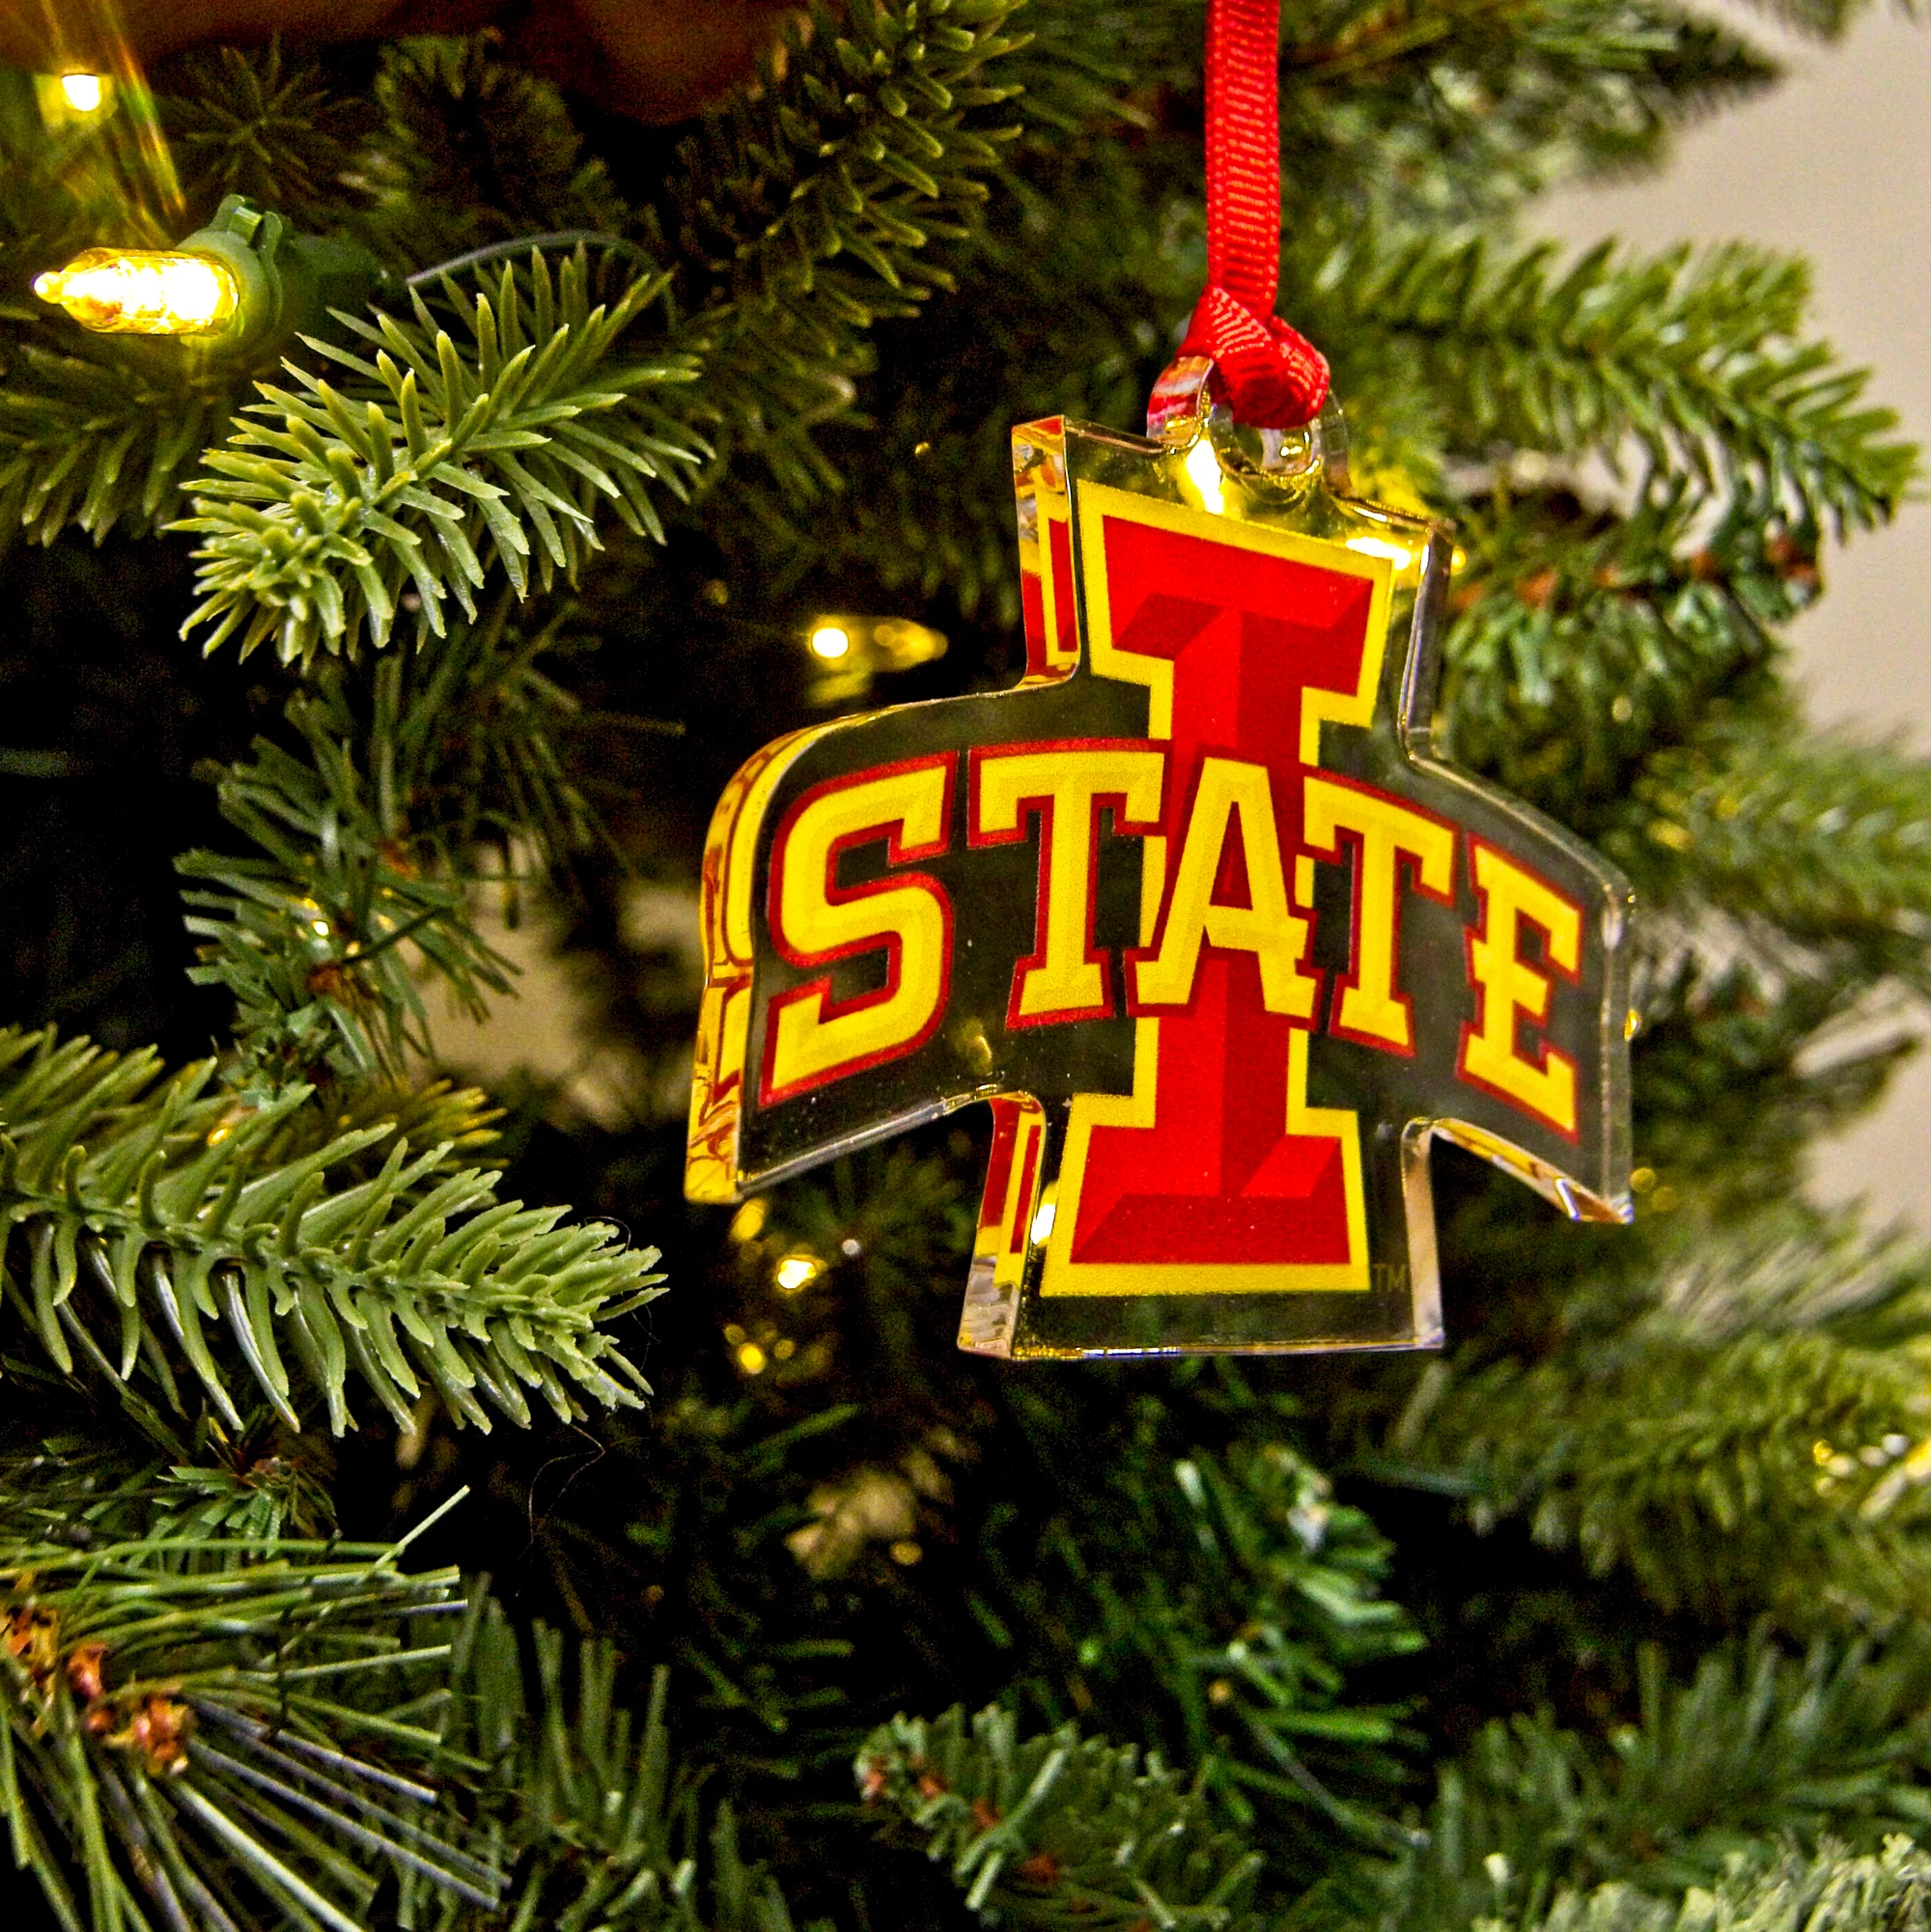 Iowa State Cyclone logo ornament hanging off of a Christmas tree.